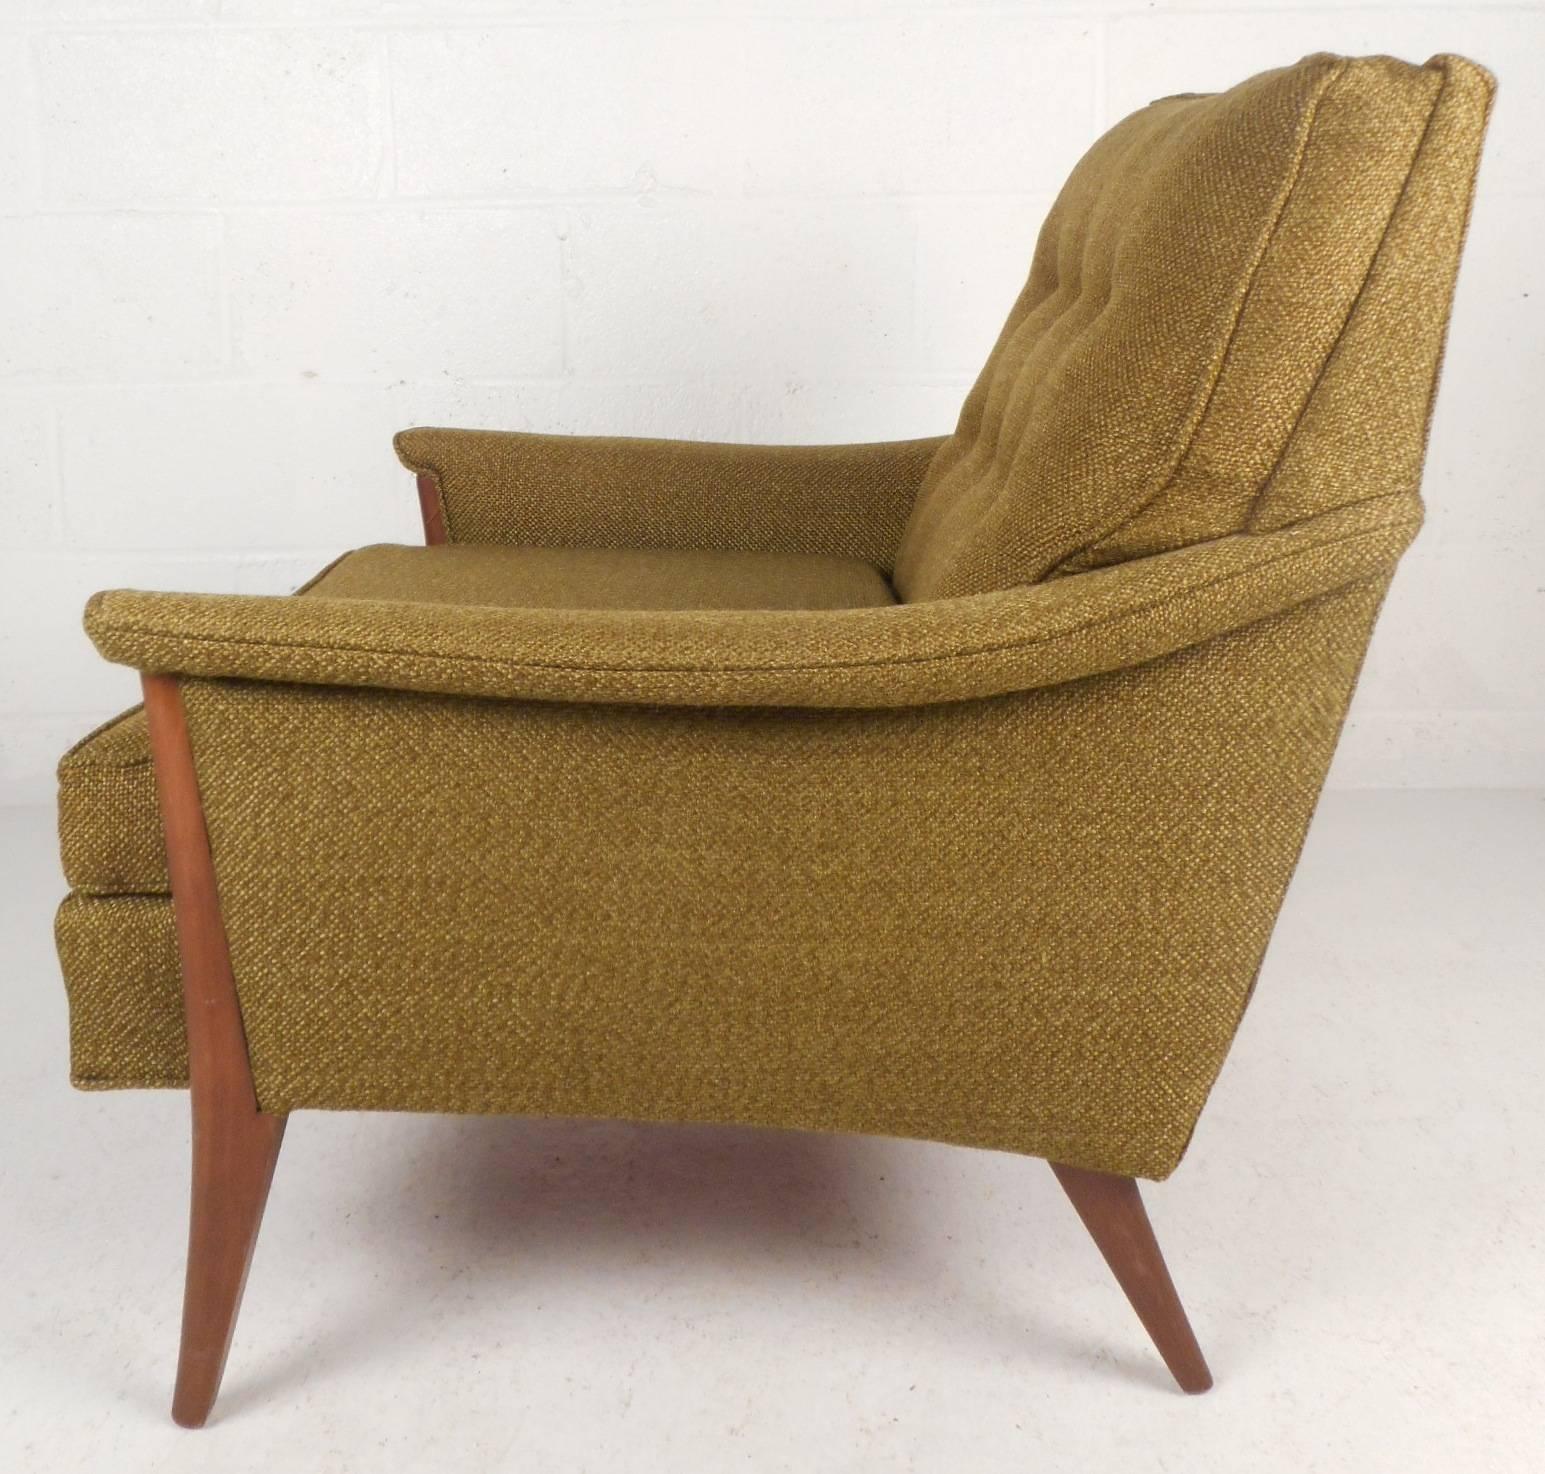 This stunning vintage modern lounge chair features a wide design with overstuffed cushions. Unique angled walnut legs and stylish winged arm rests add to the Mid-Century appeal. The elegant plush green upholstery and tufted backrest make this